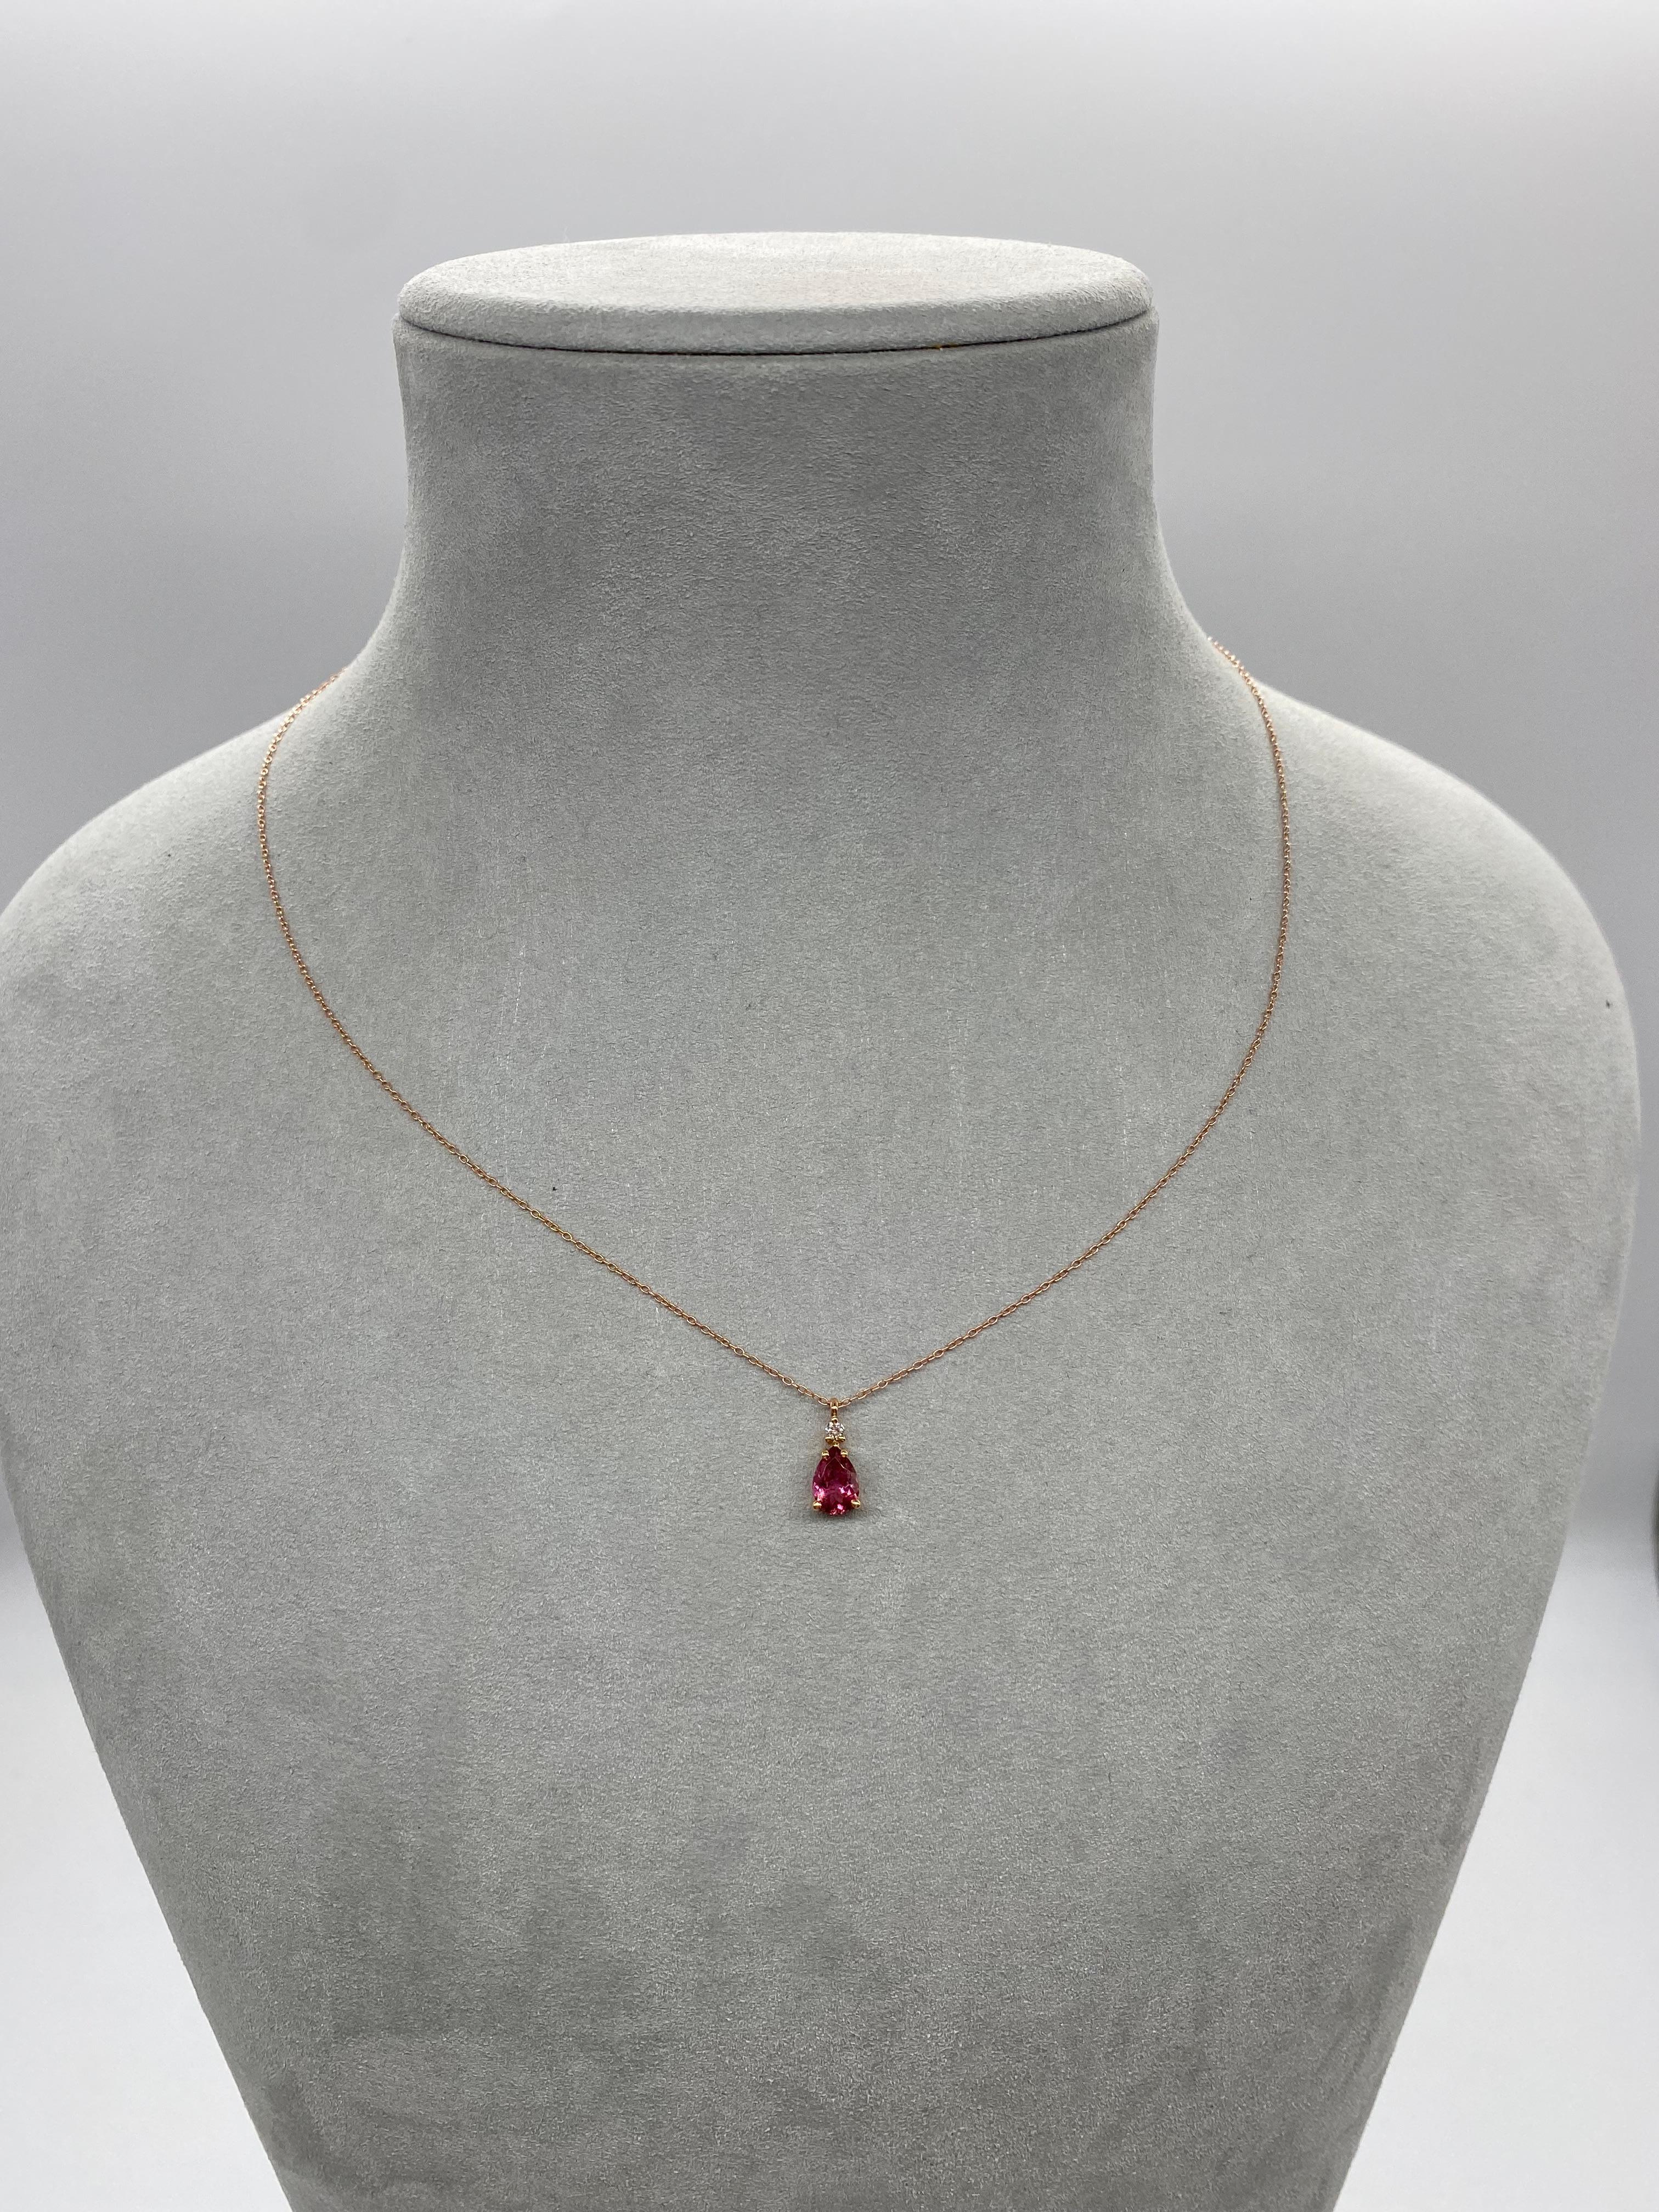 Discover our magnificent rose gold pendant necklace, featuring a tourmaline and a diamond from the French collection of Mesure et Art du Temps. This exquisite jewel combines elegance and discretion, while making a remarkable impression.

The